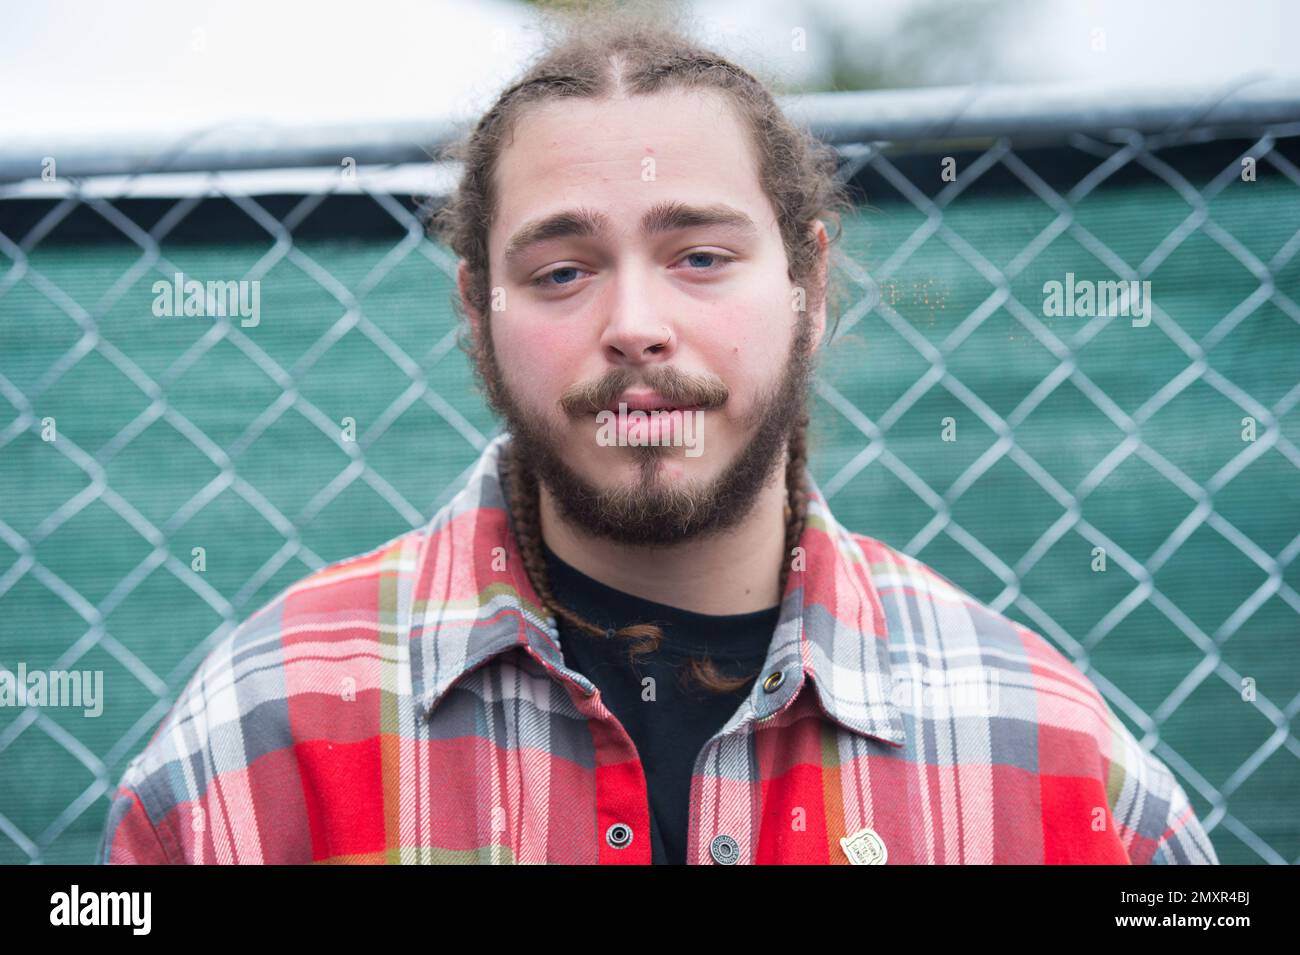 Artist Post Malone poses for a photo backstage at the 2016 The Meadows Music and Arts Festivals at Citi on Saturday, Oct. 1, 2016, Flushing, New York. (Photo by Scott